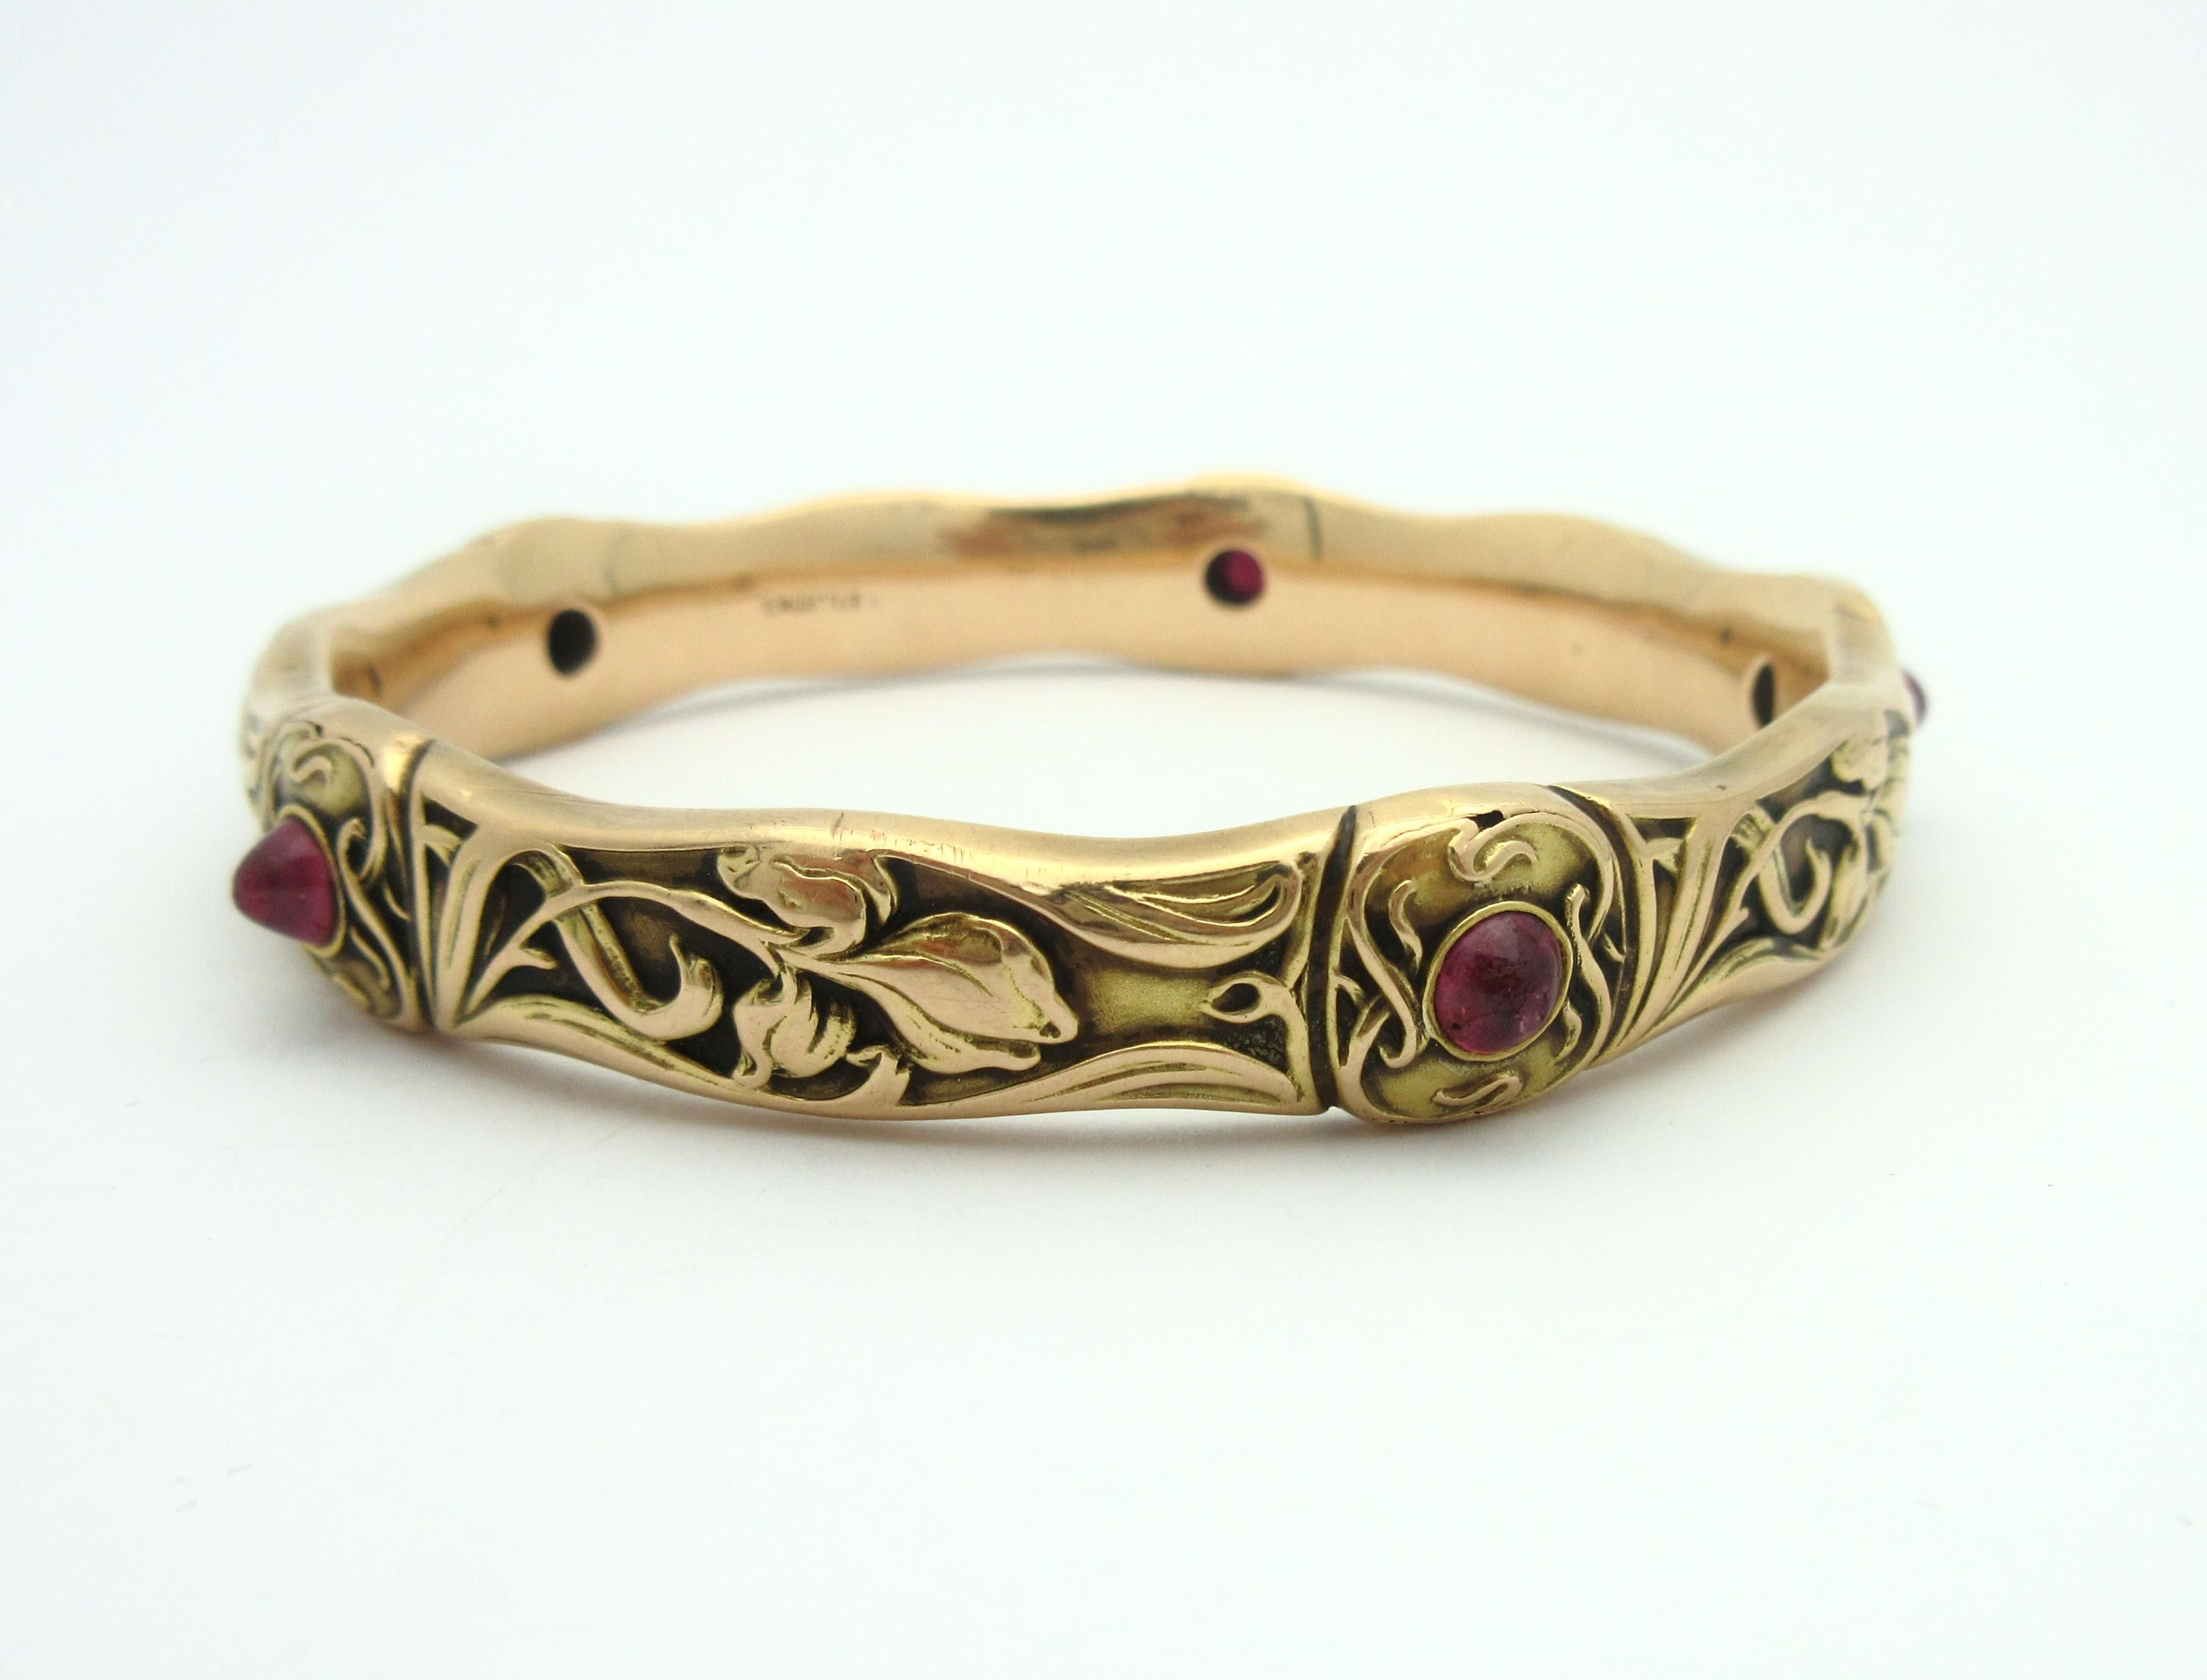 This exquisite early Art Nouveau bangle by EM Gattle & Co is a work of art.  Crafted from 14k rosy yellow gold, the floral bangle is accented by four natural unheated sugarloaf rubies and one created ruby.  The bangle features panels of repousse